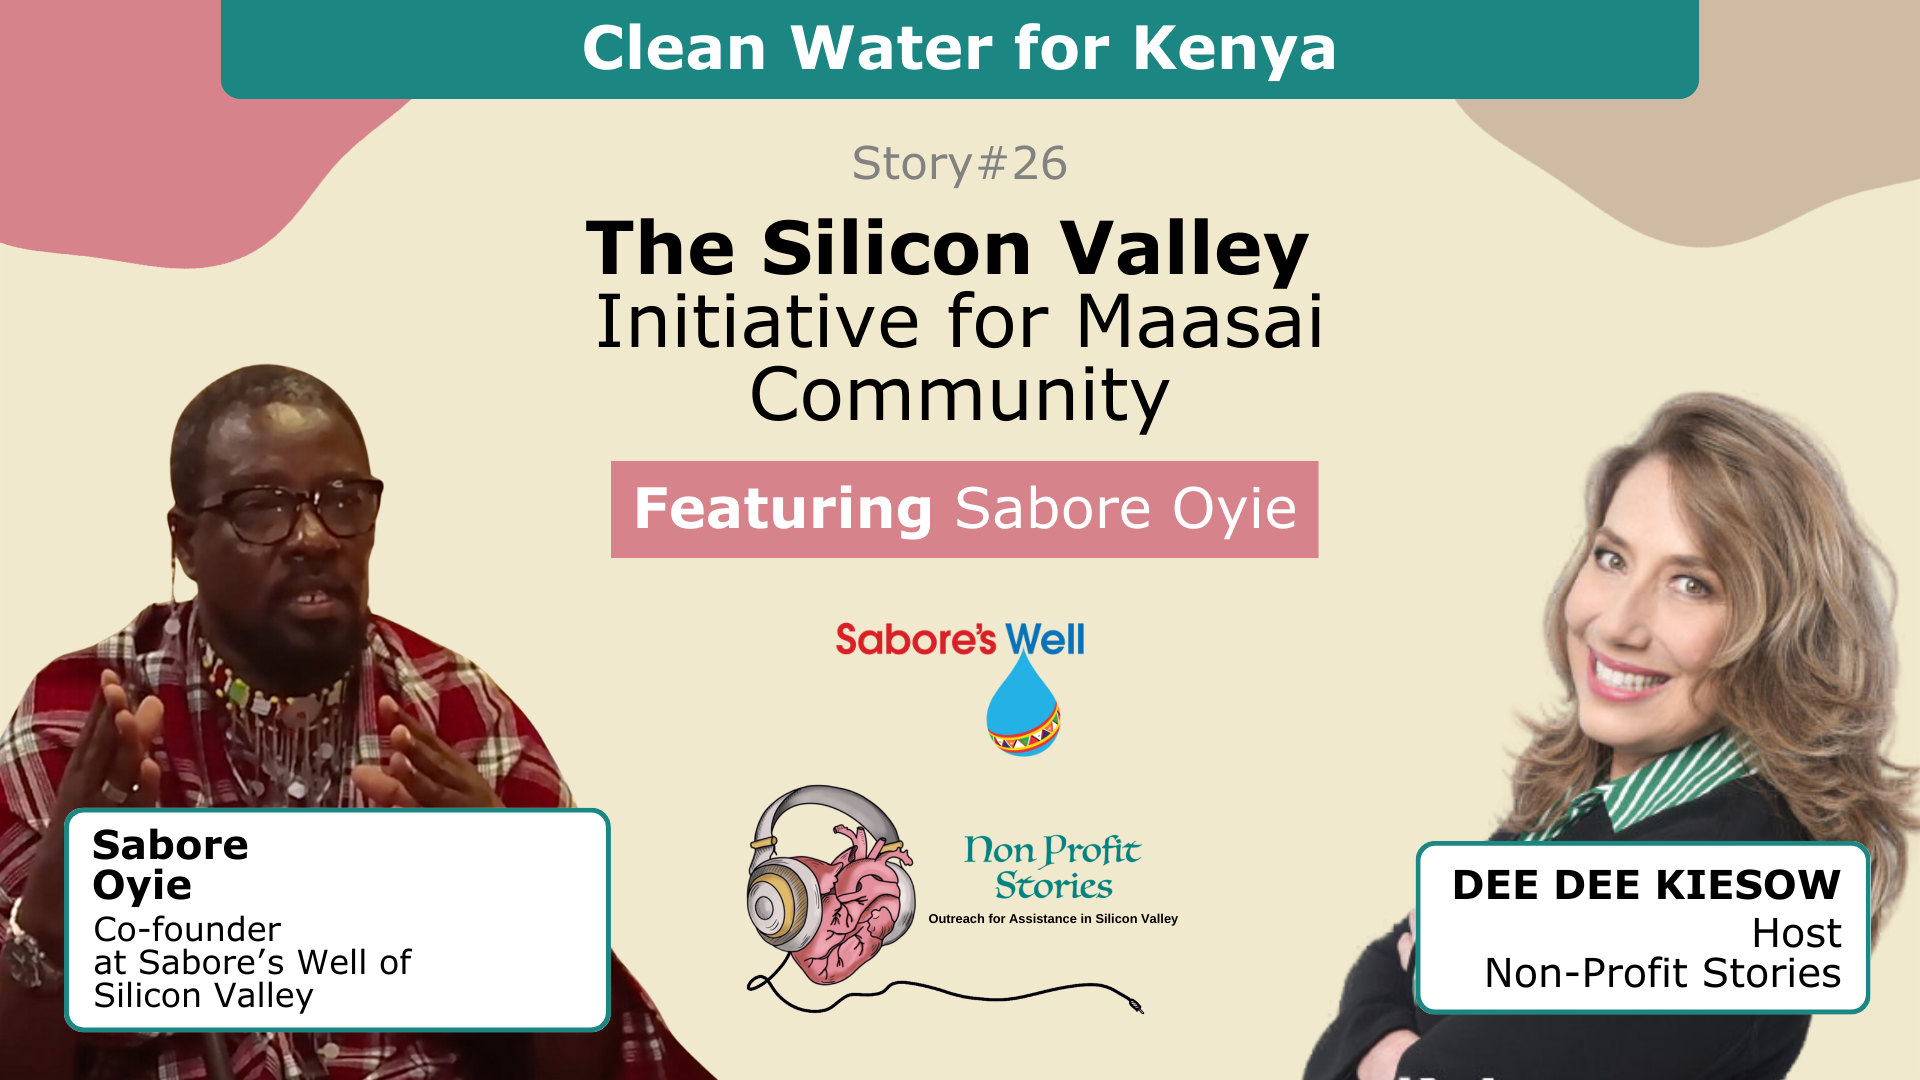 Clean Water: The Silicon Valley Initiative for Maasai Community Video